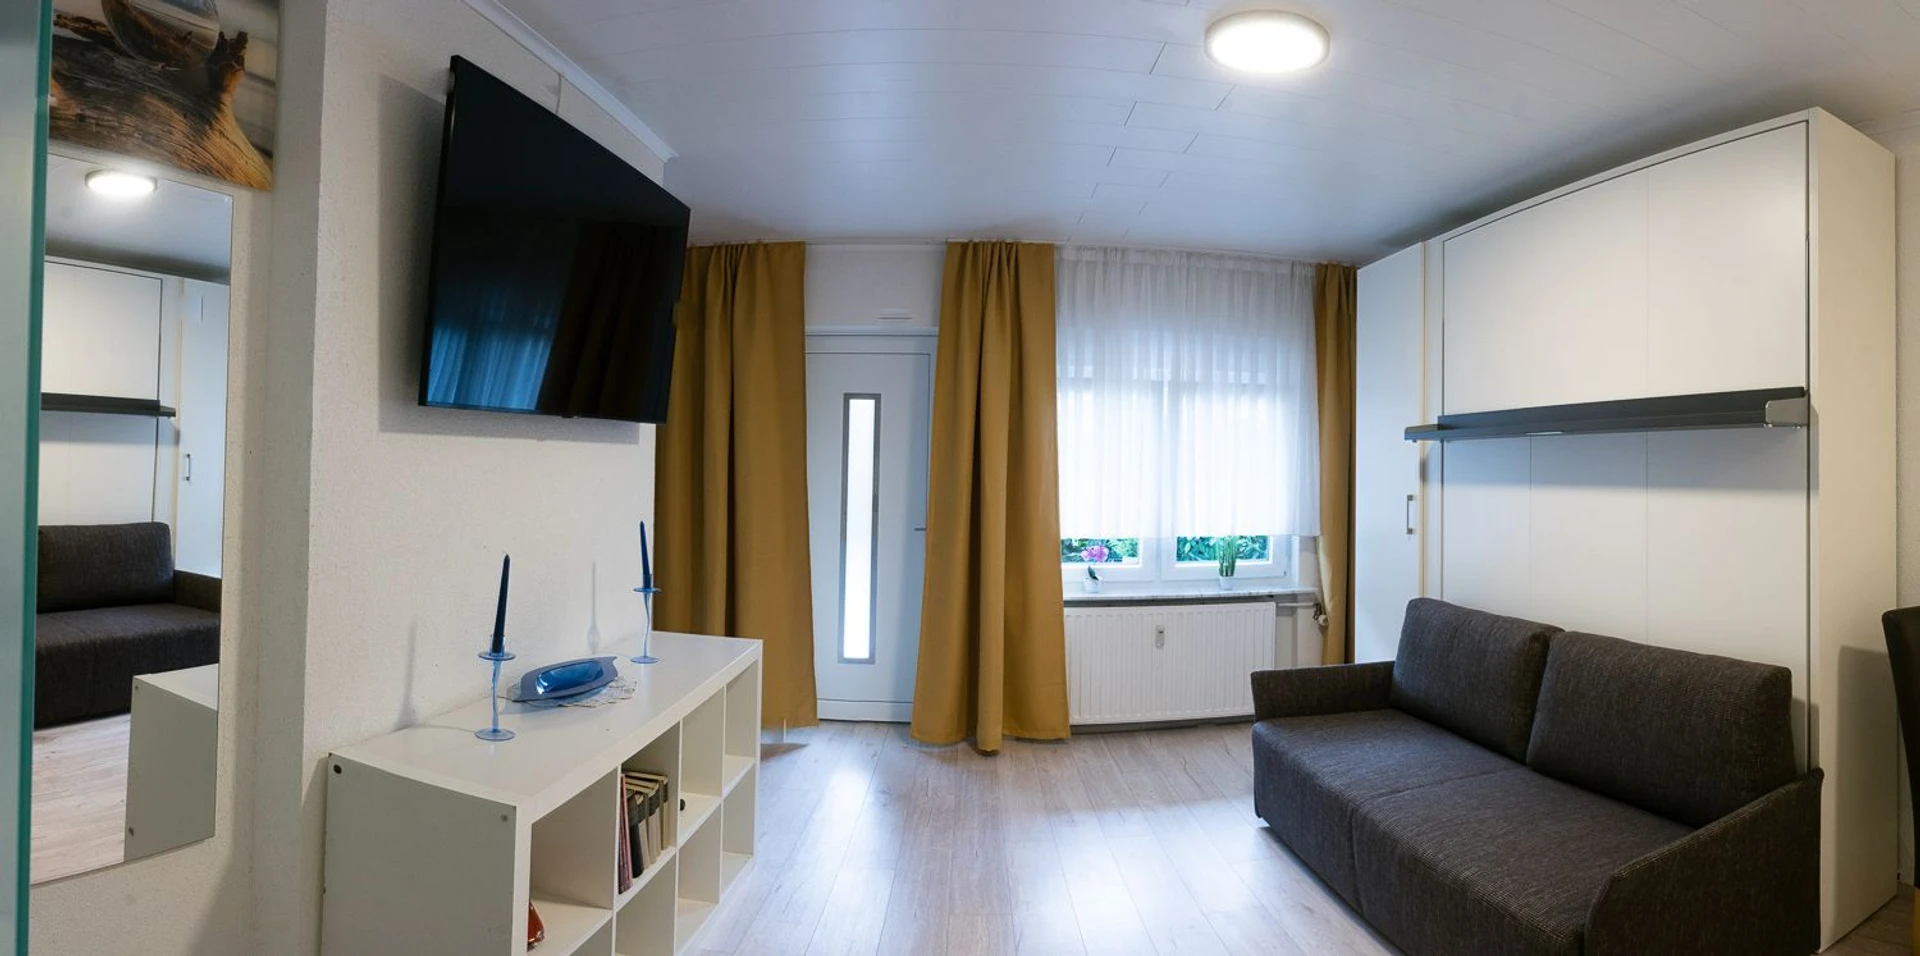 Renting rooms by the month in Darmstadt